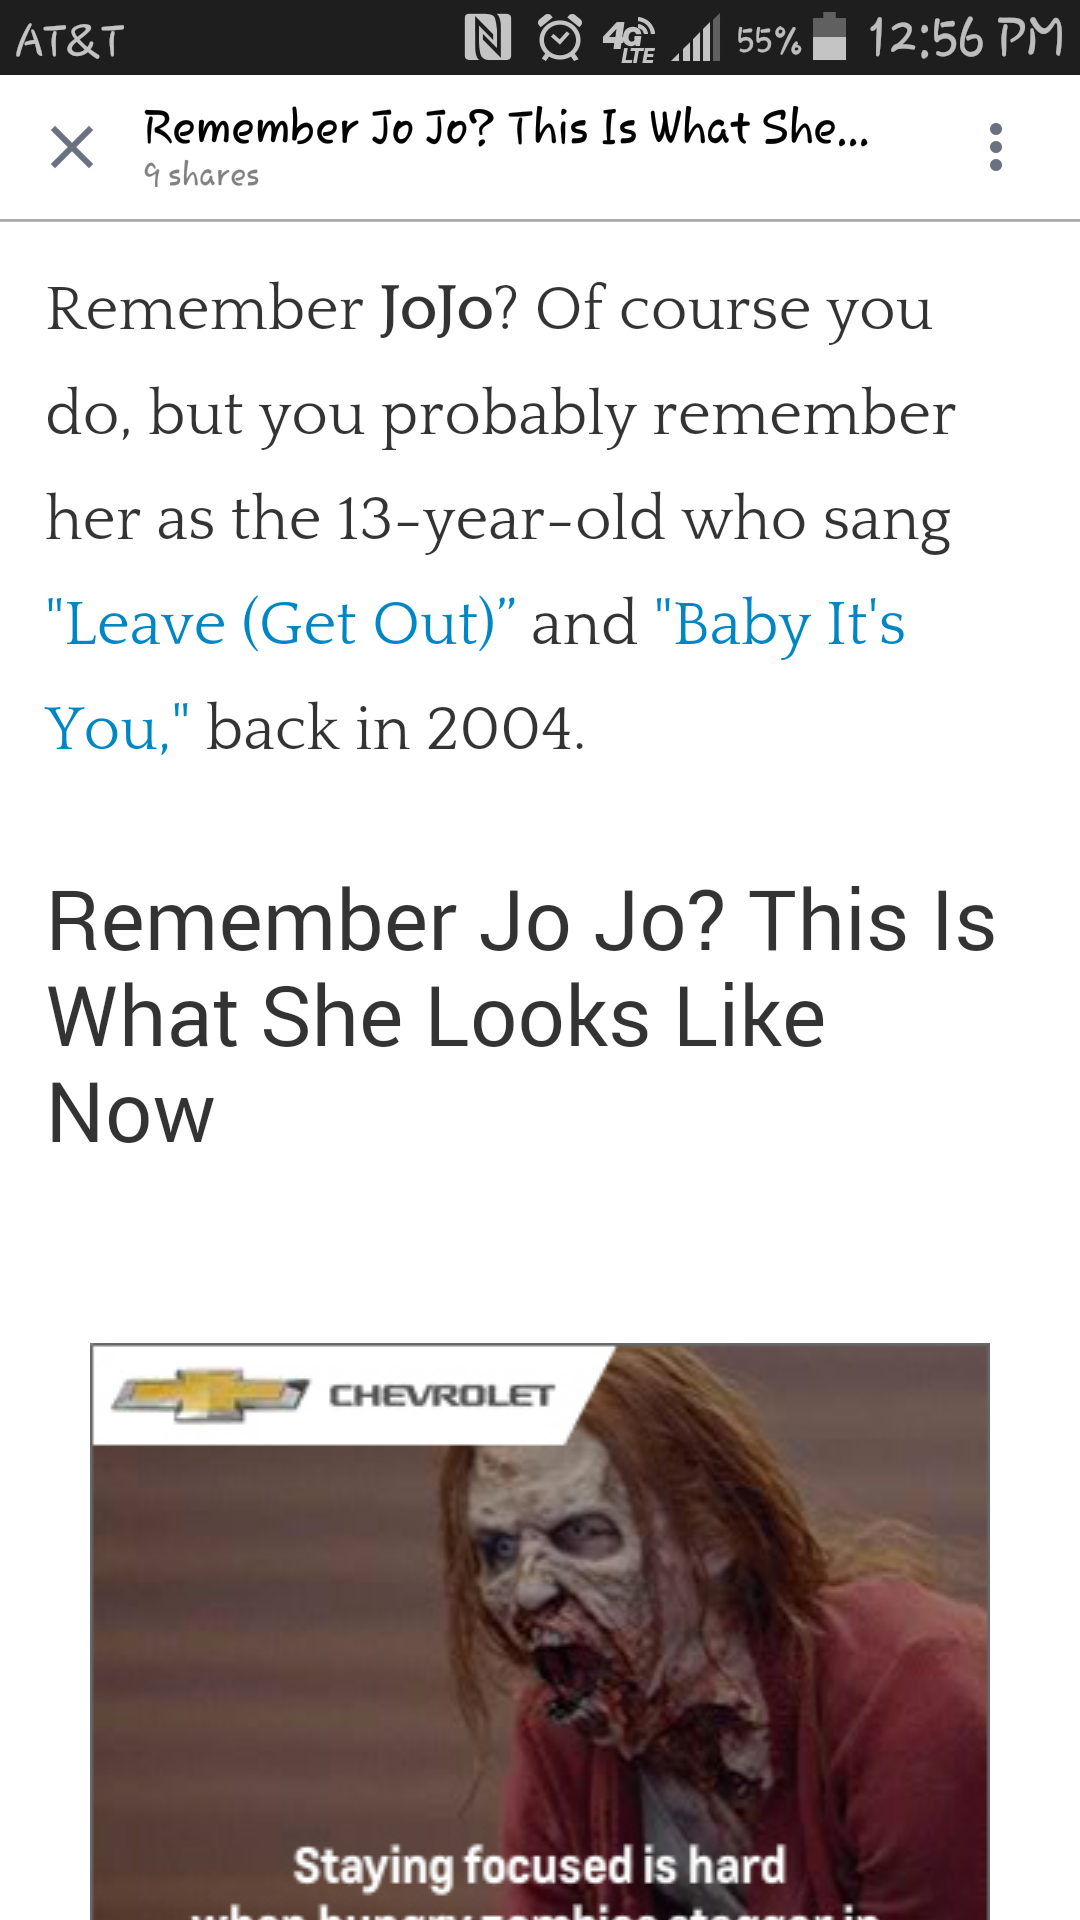 Screenshot of some idiotic clickbait article with the perfect ad placement.